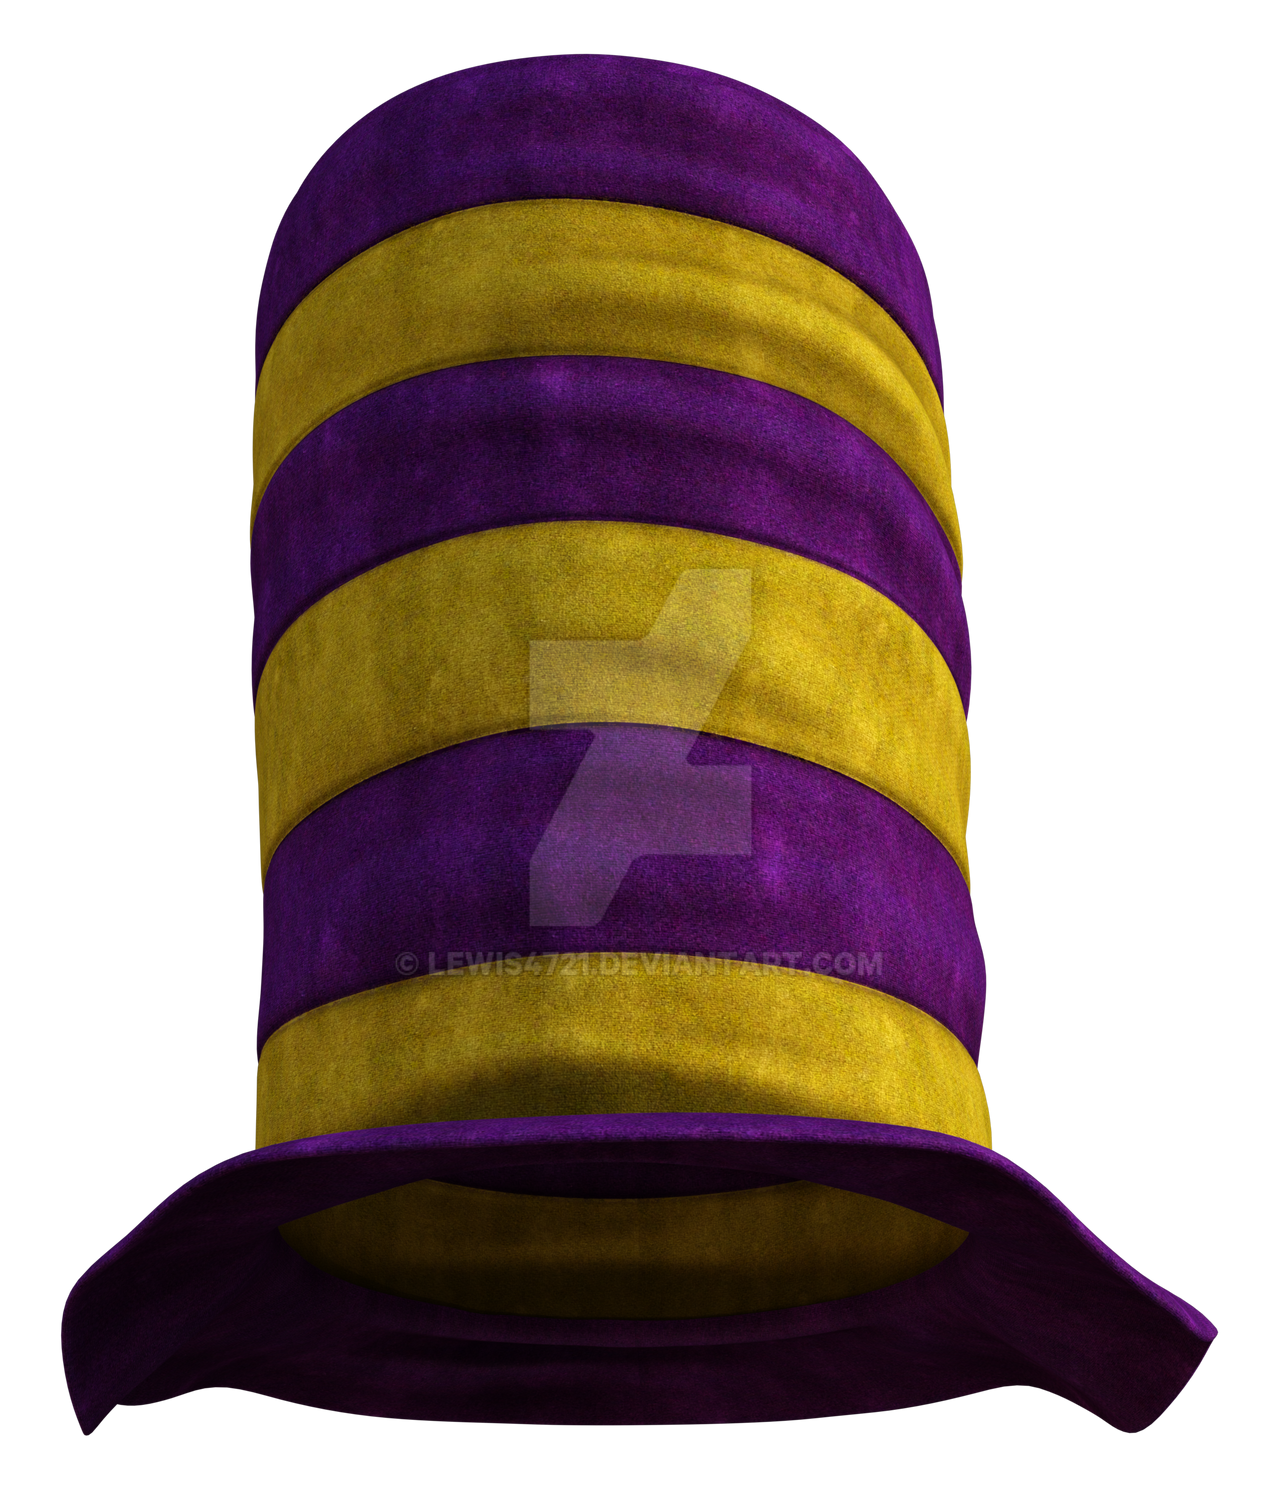 Tall funny hat 3, png overlay. by lewis4721 on DeviantArt